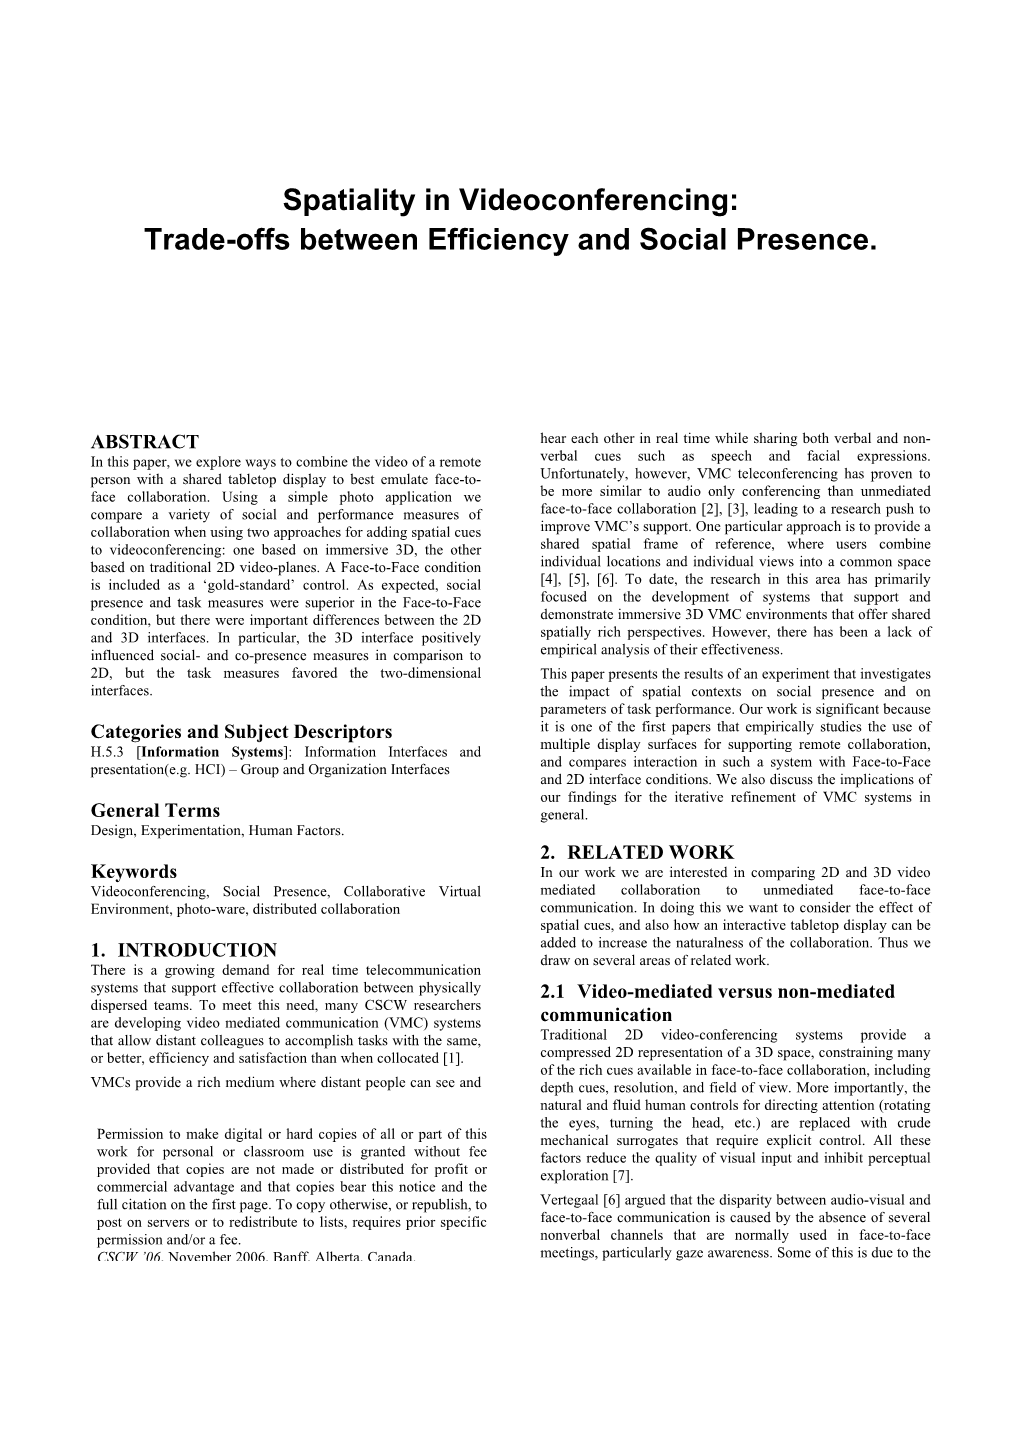 Spatiality in Videoconferencing: Trade-Offs Between Efficiency and Social Presence